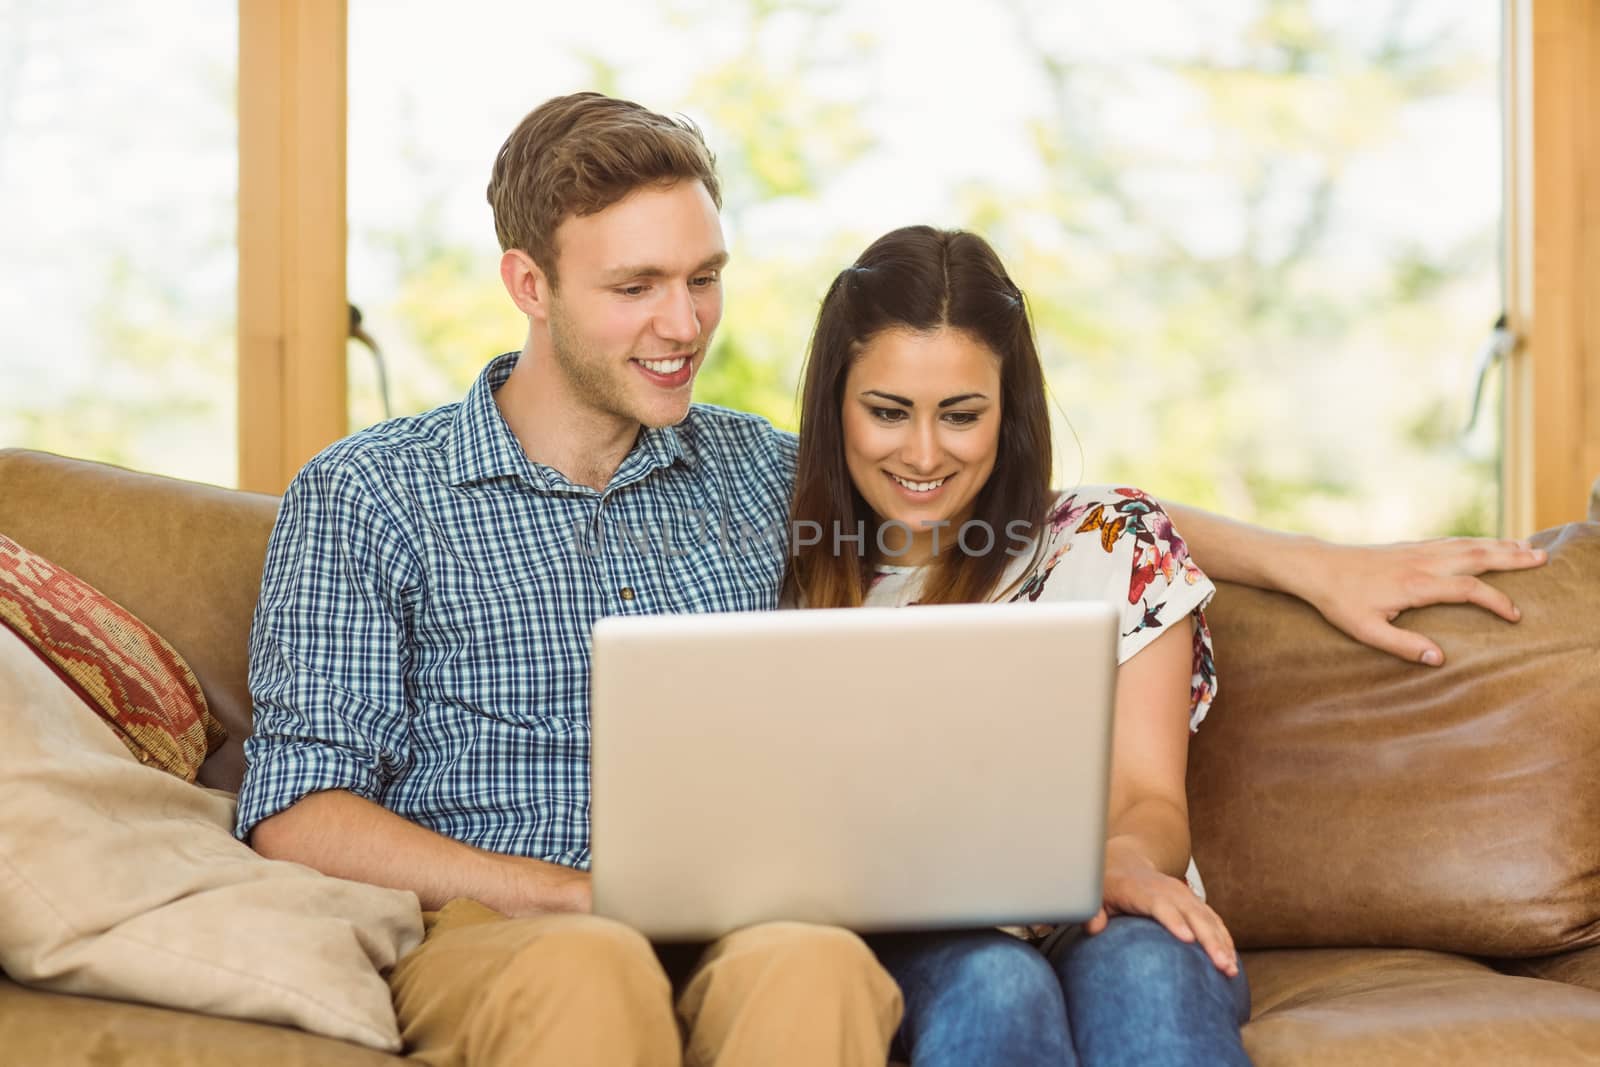 Young cute couple relaxing on couch with laptop at home in the living room